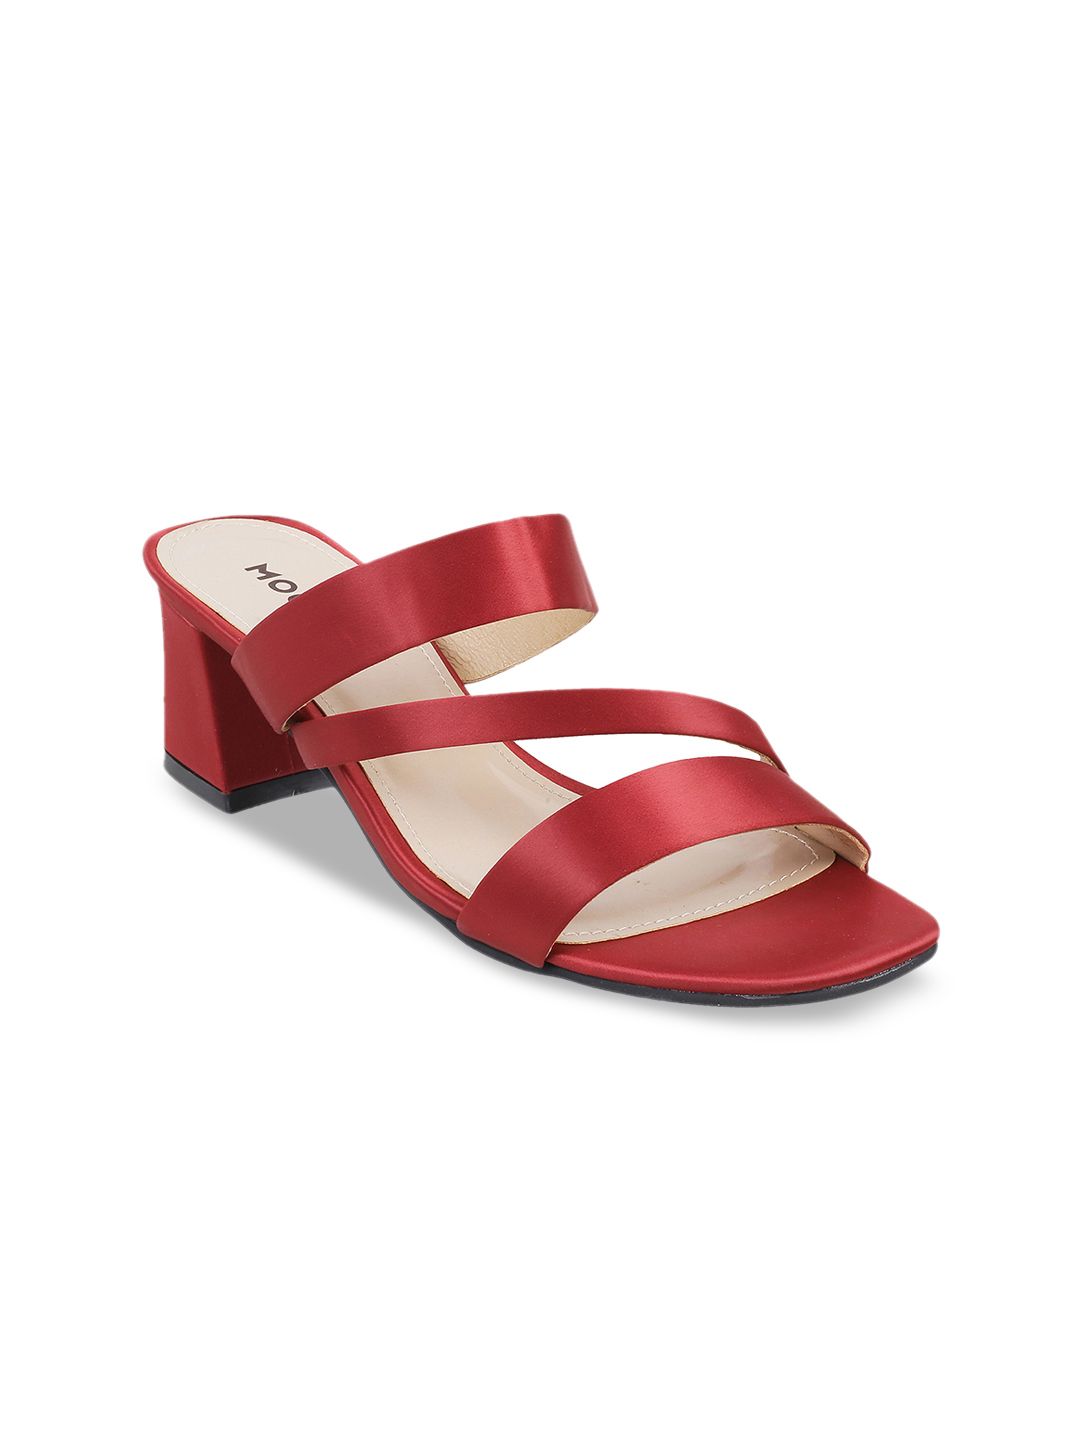 Mochi Women Maroon Solid Sandals Price in India